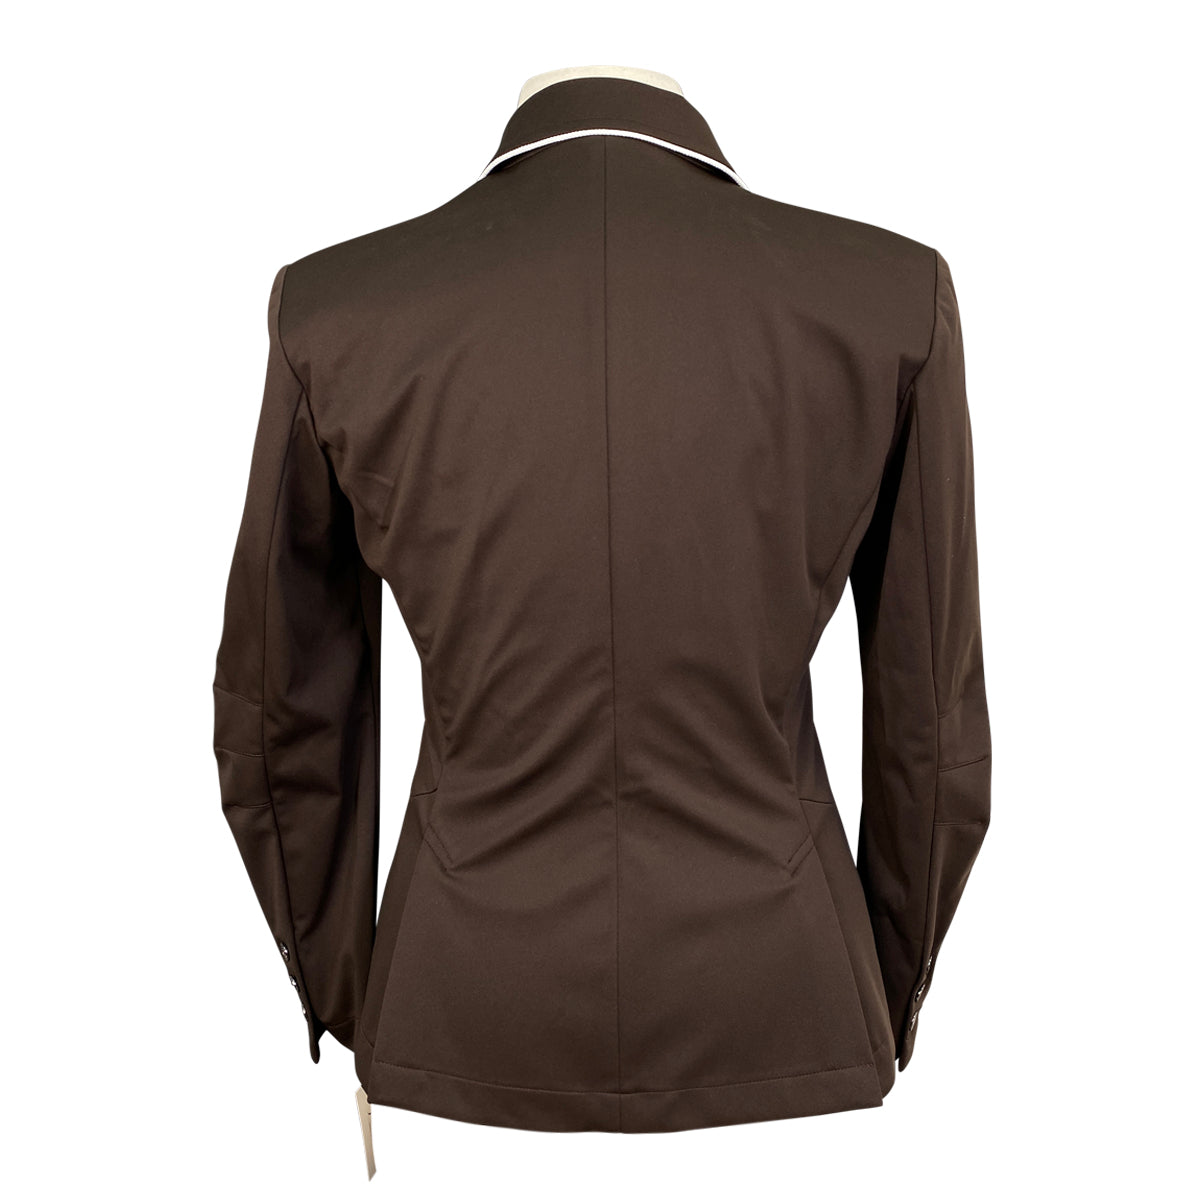 Fair Play 'Michelle' Show Jacket in Brown w/White Piping